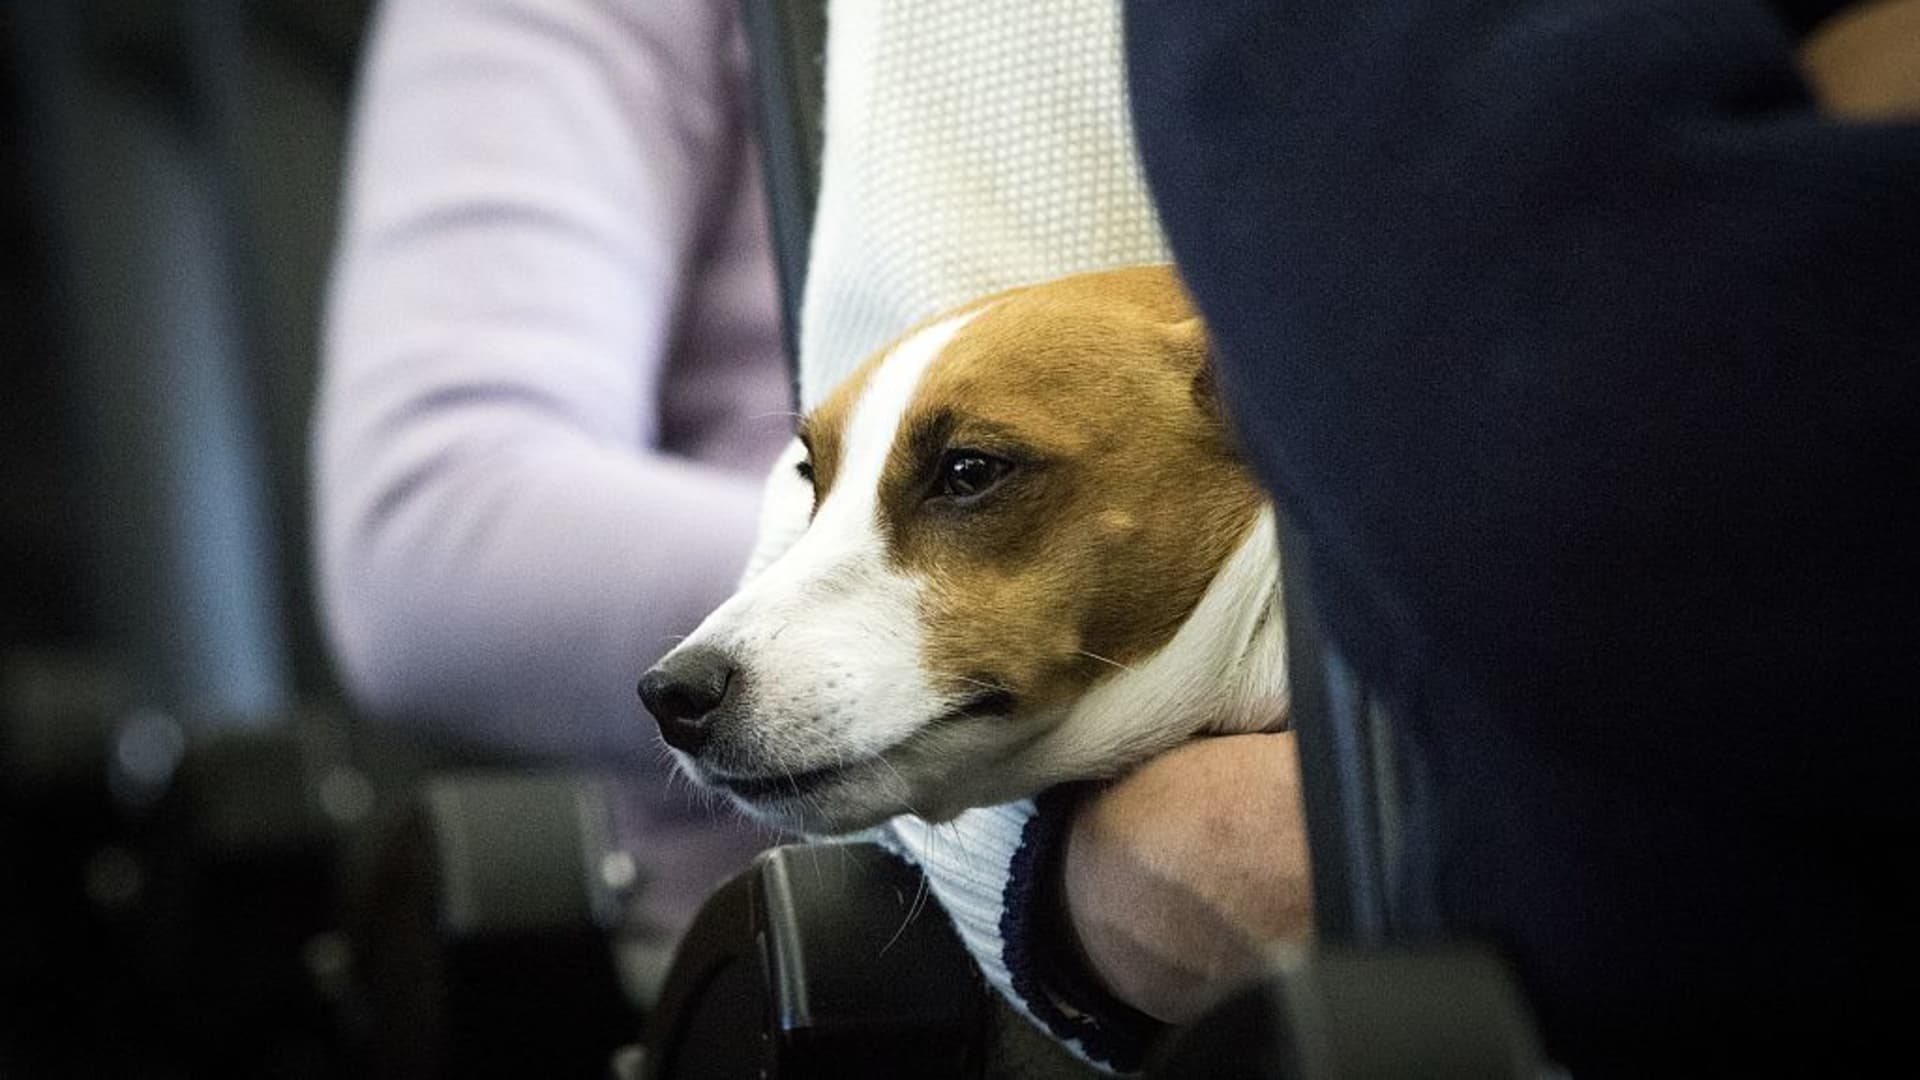 United Airlines bans emotional-support puppies and kittens